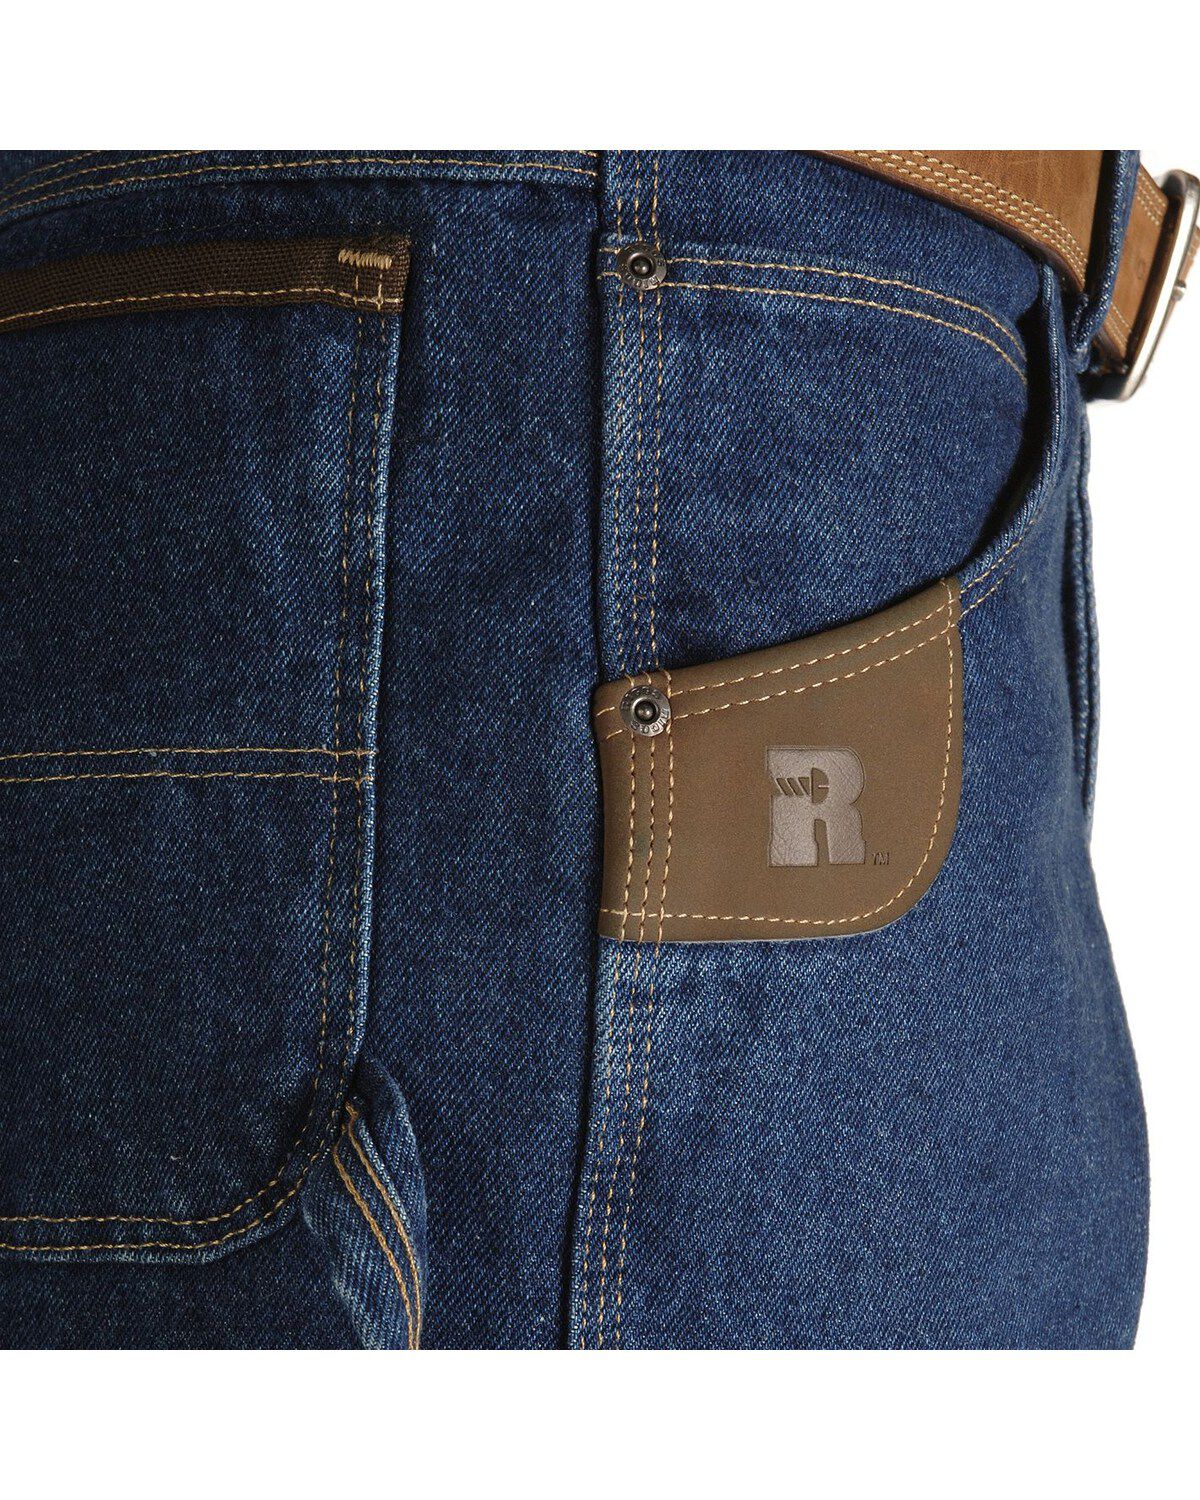 jeans with leather pockets